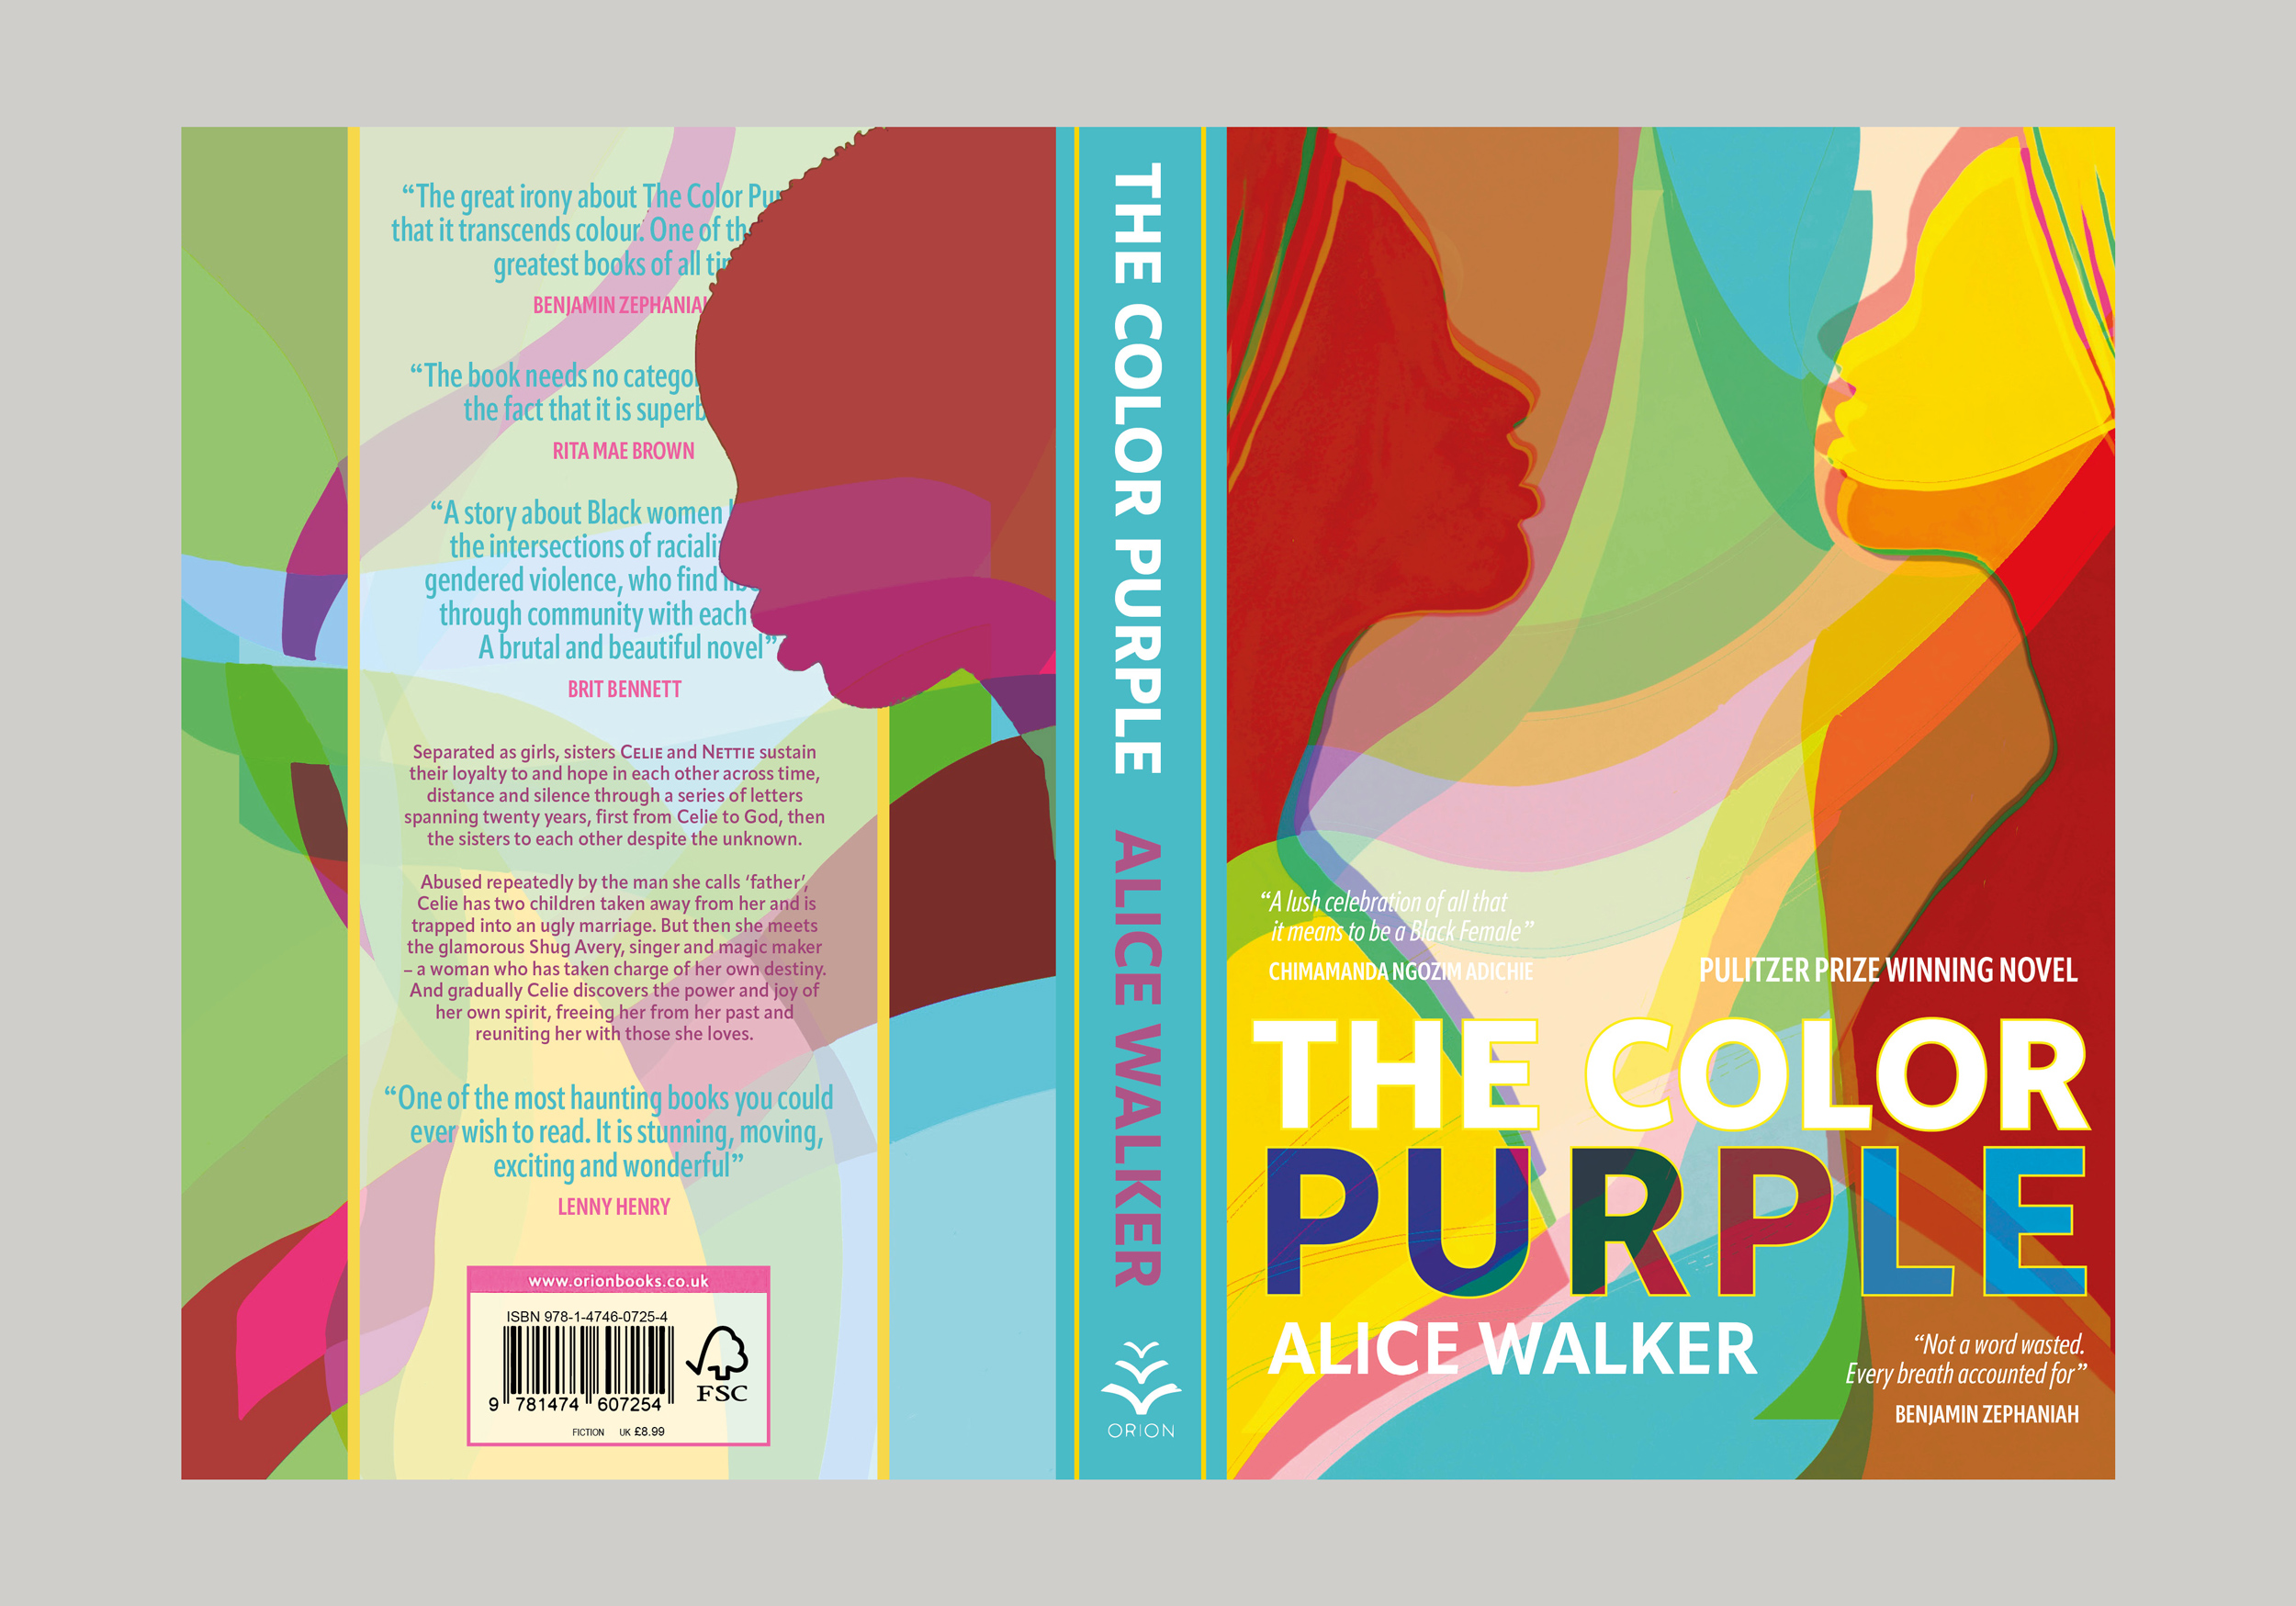 BA Design for Publishing work by Hannah Goldsmith showing a bright abstract design with colourful silhouettes for the book: The Color Purple written by Alice Walker